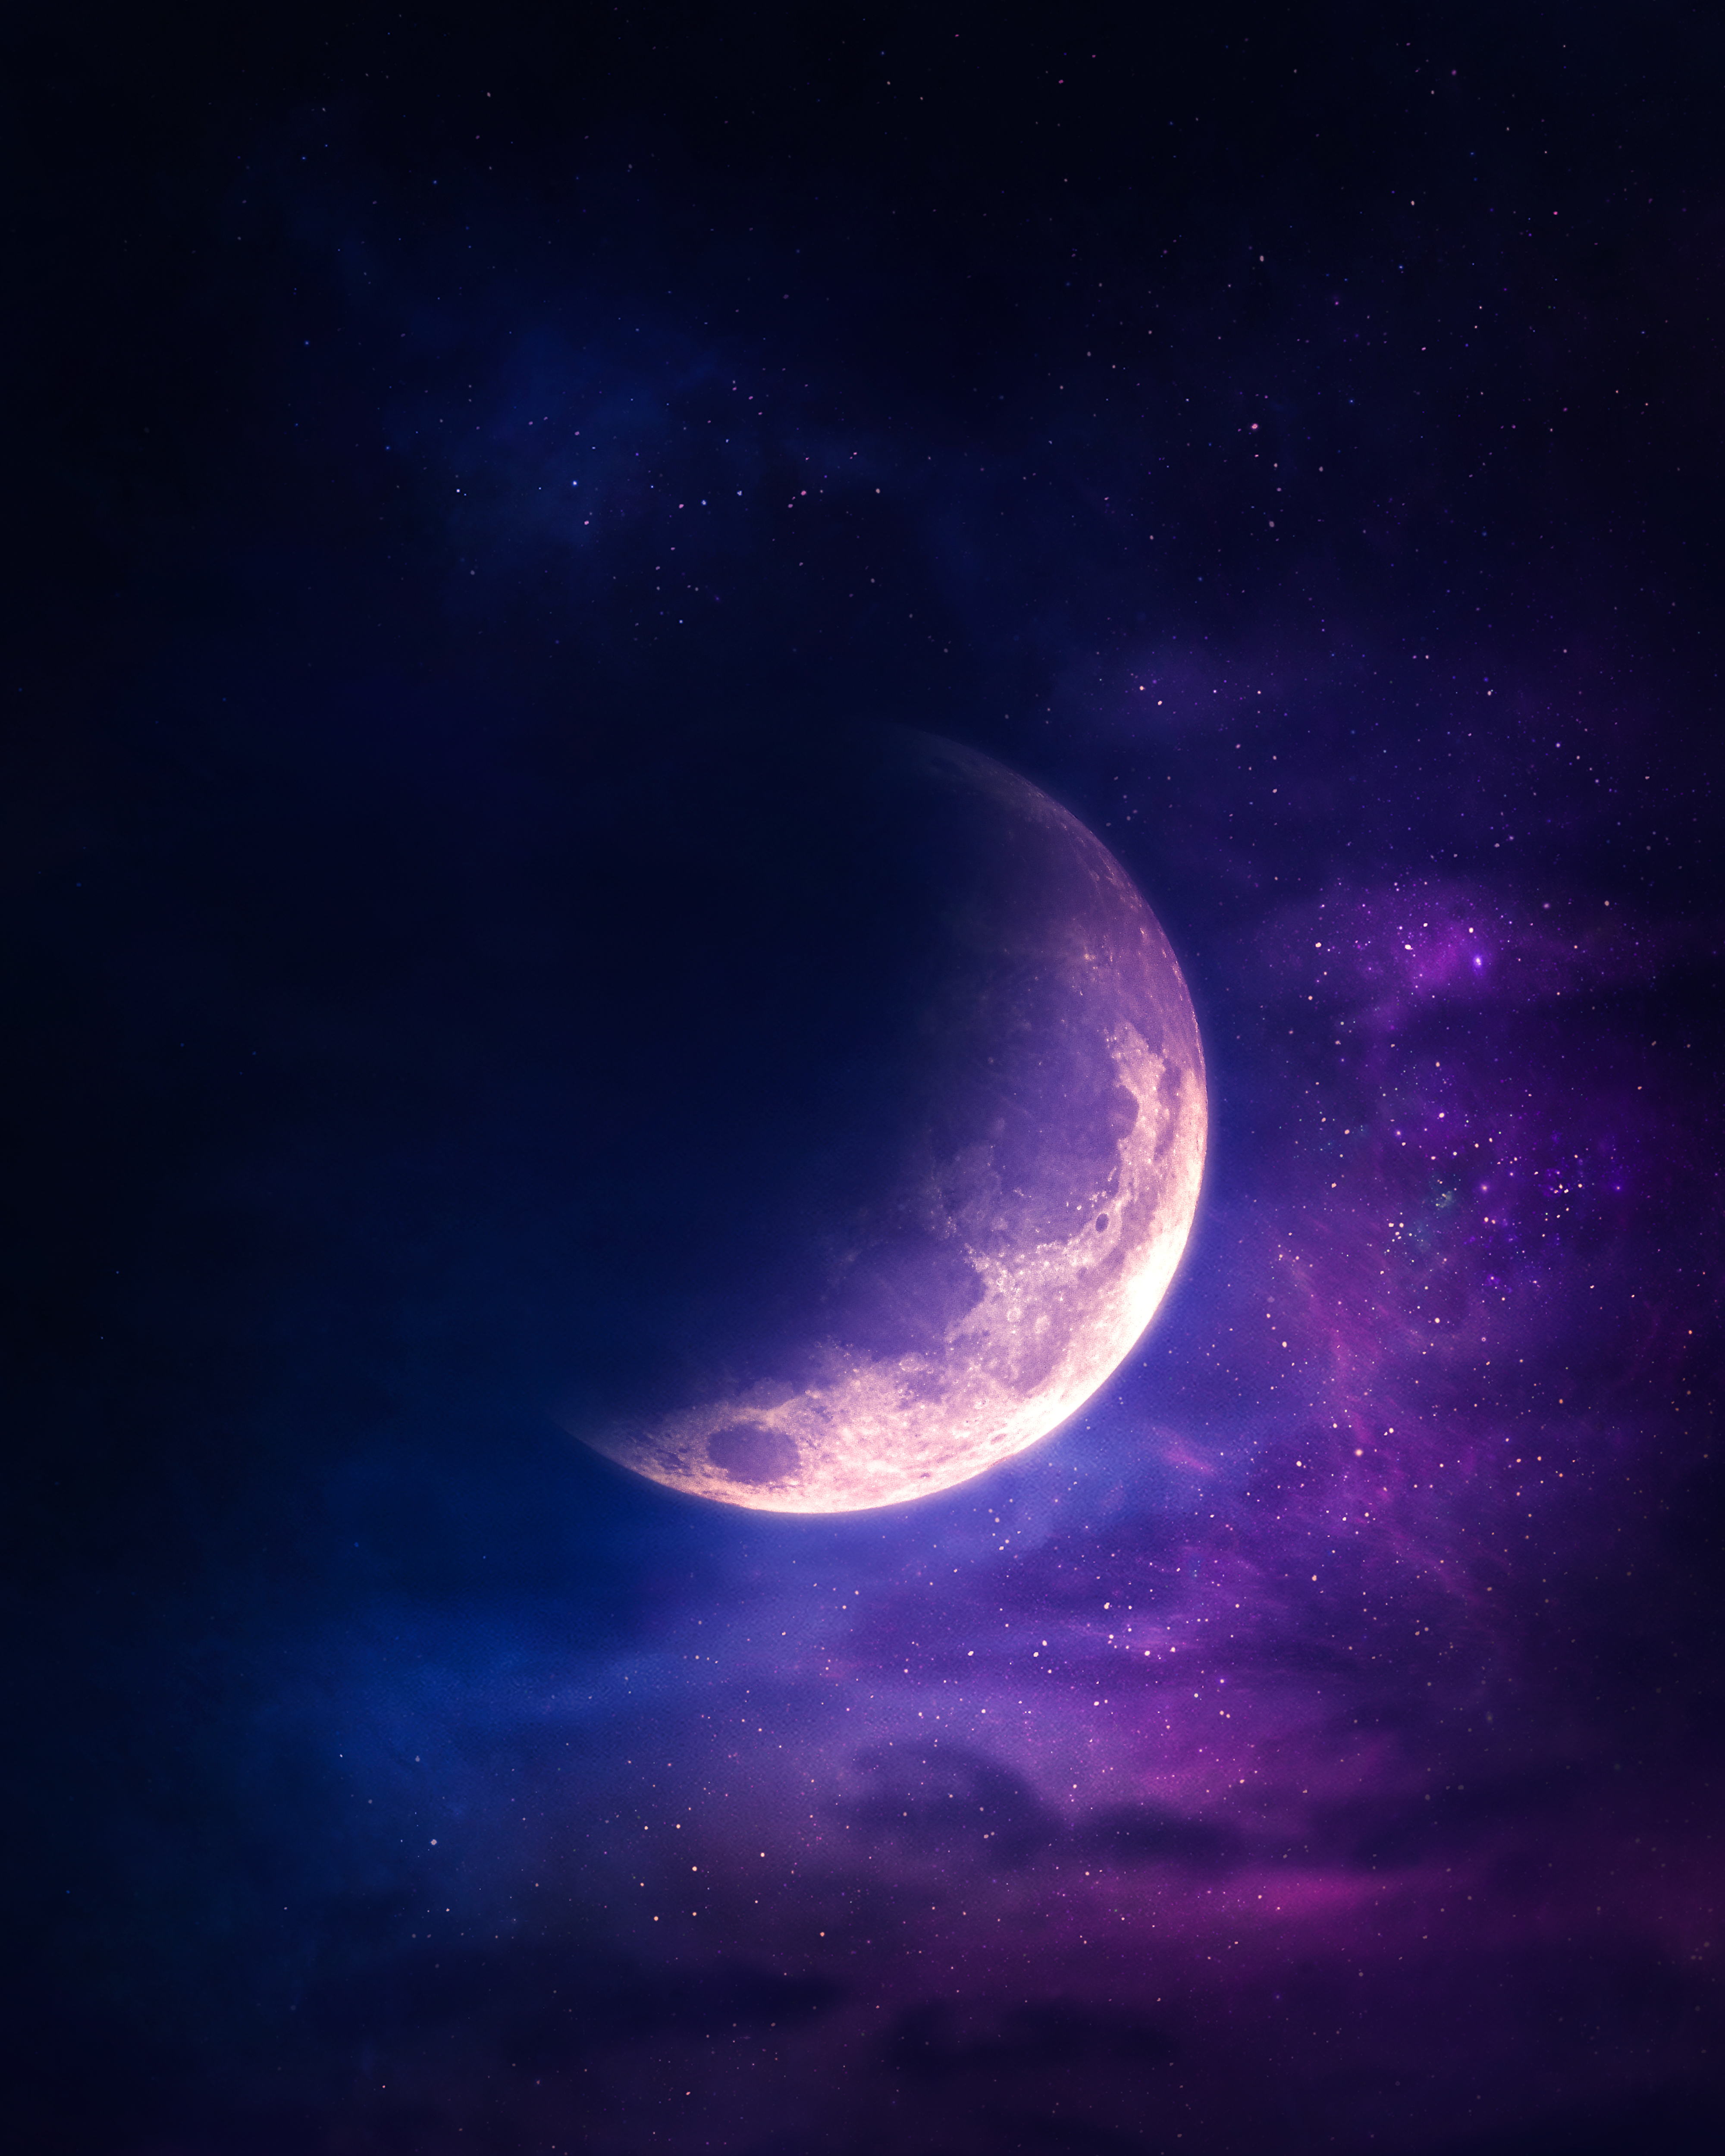 Wallpaper Dreaming Aesthetic Anime Anime Animation Night Star  Background  Download Free Image